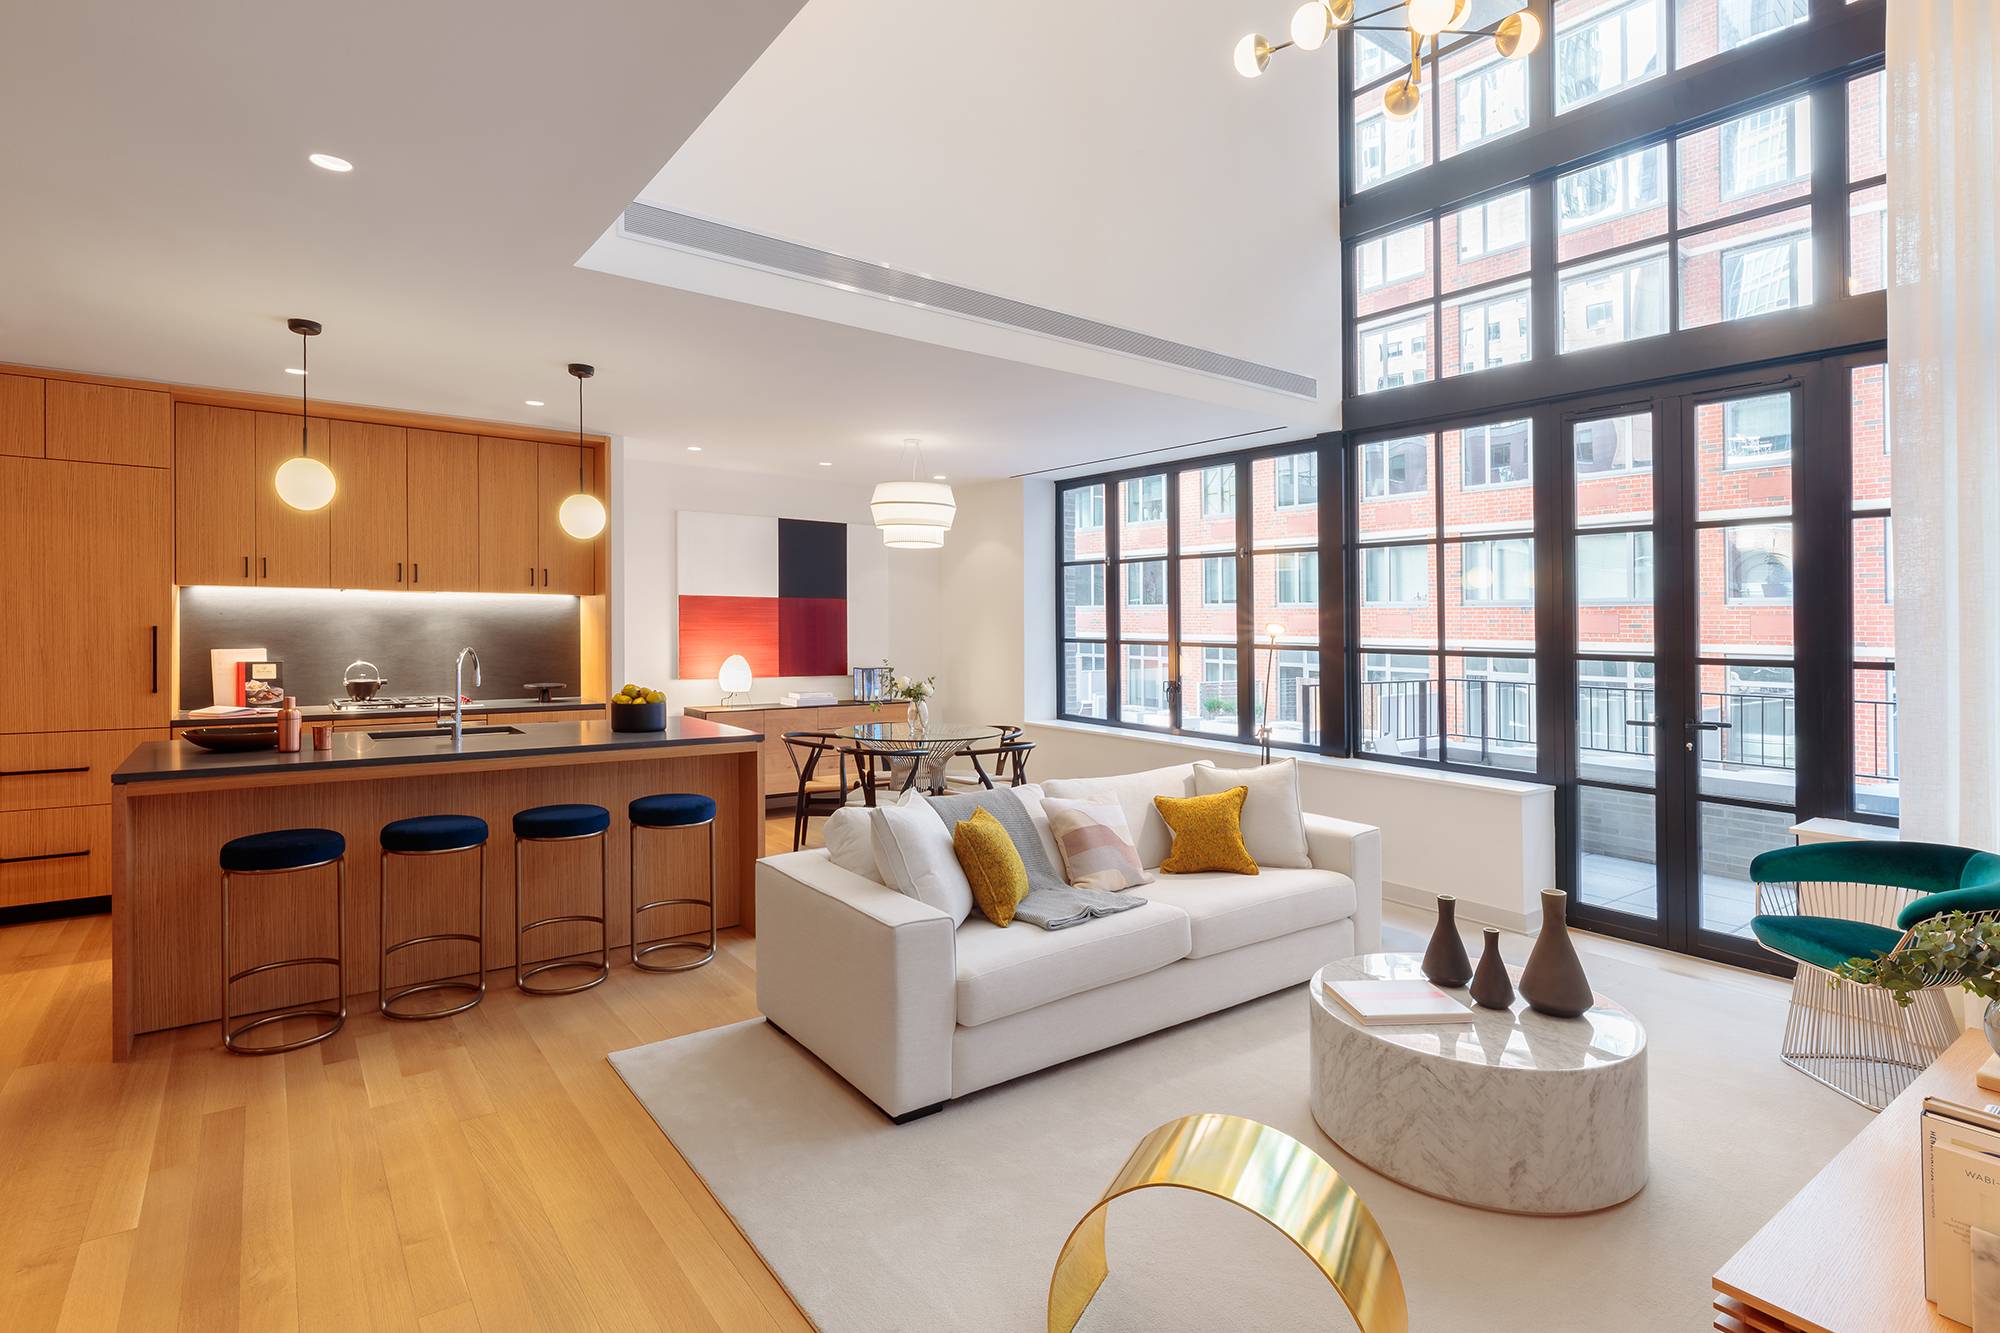 NEW DEVELOPMENT: Introducing SoHY | South of Hudson Yards